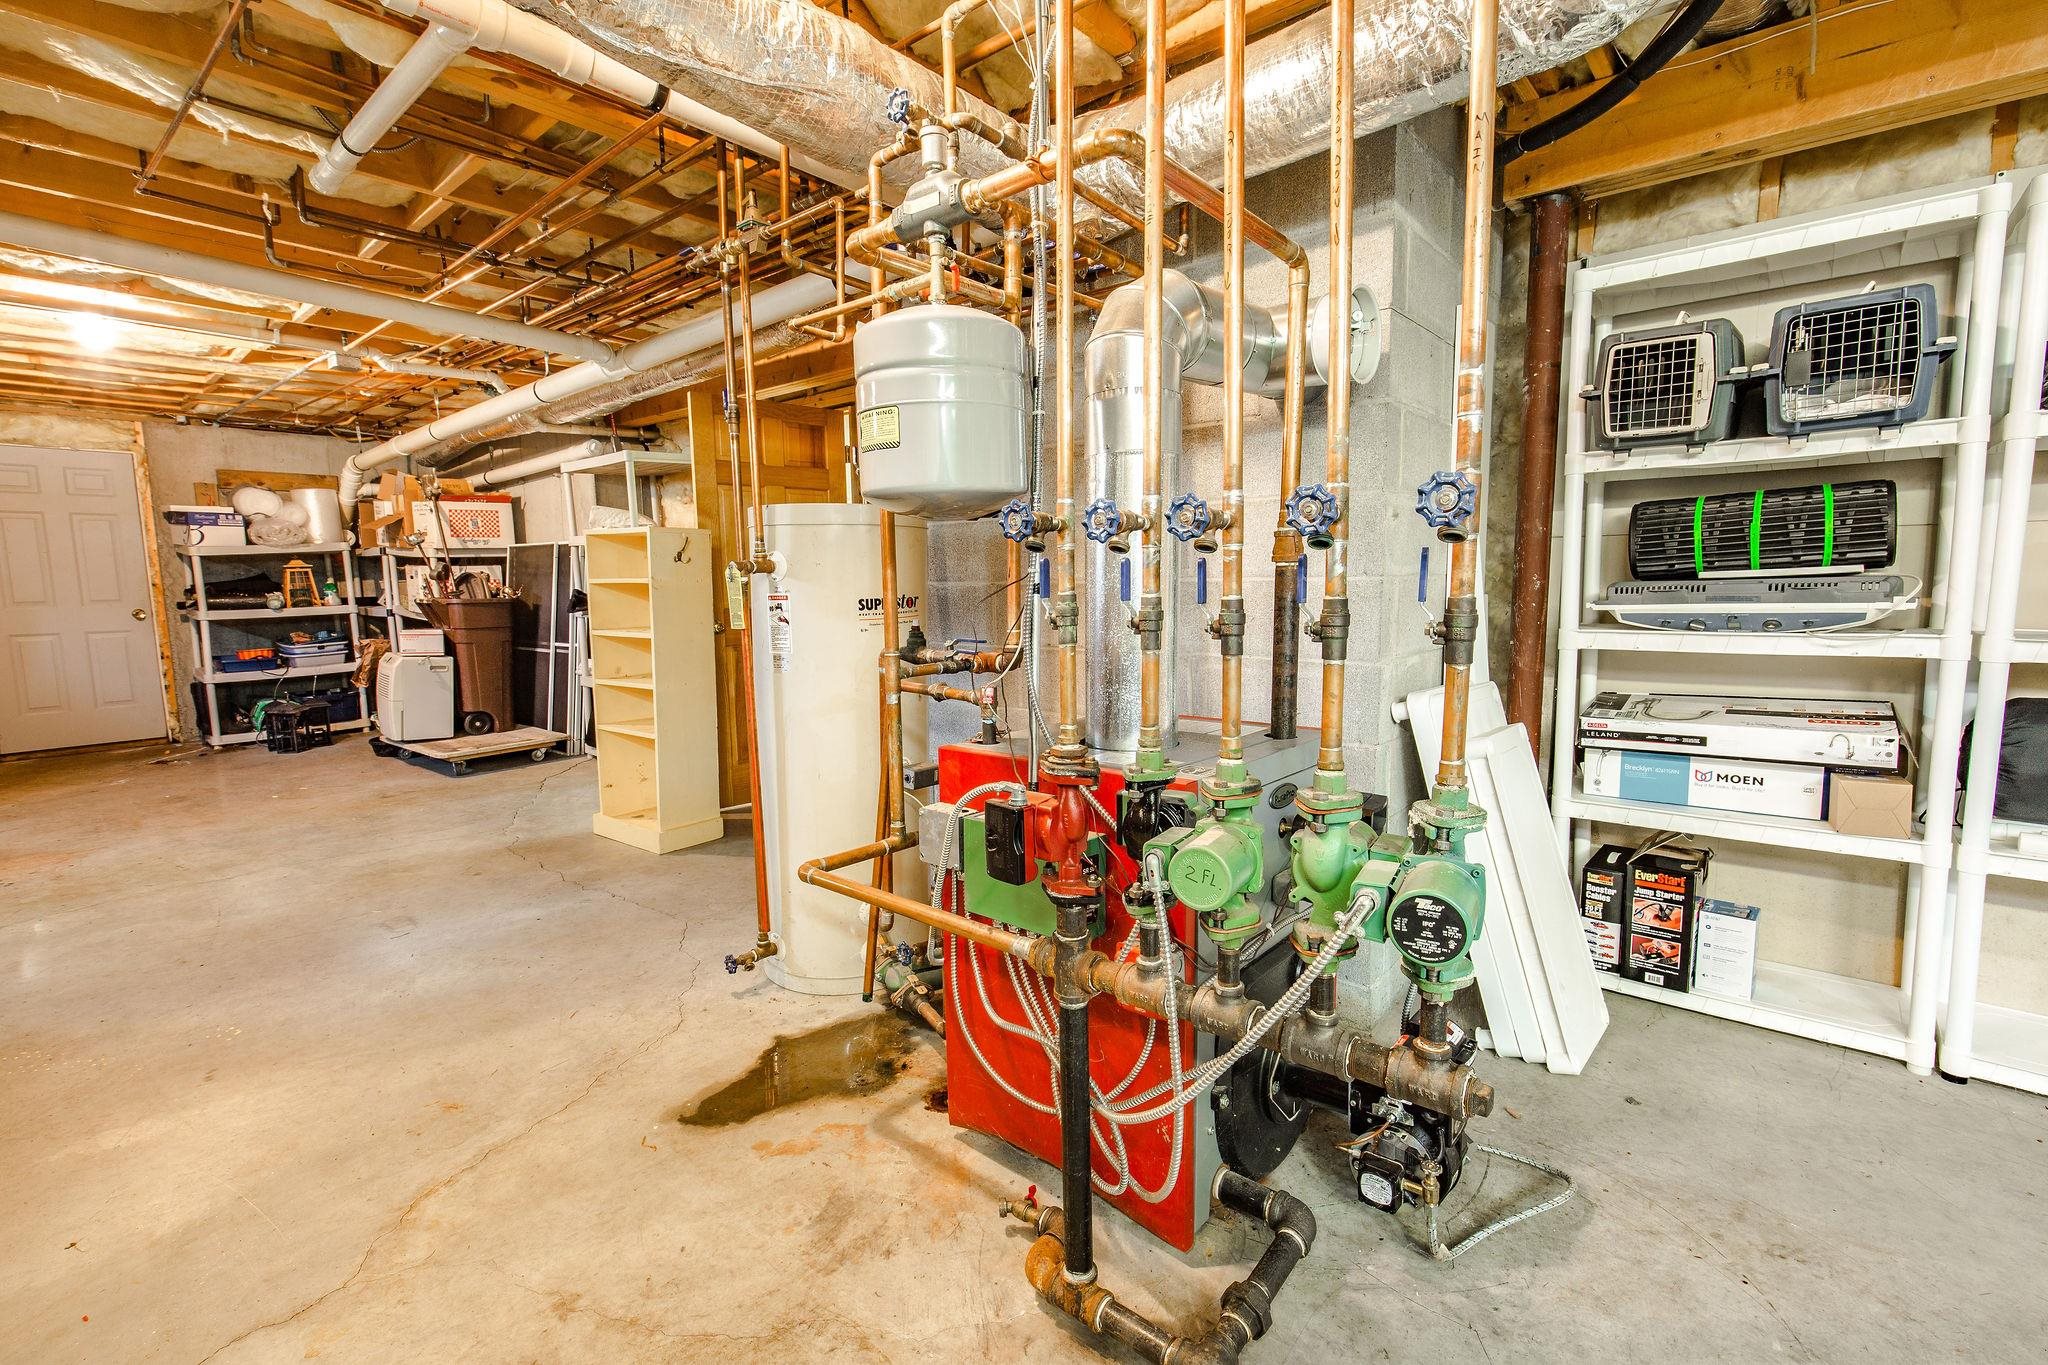 The basement combines a comfortable living space with a very large utility area, with a bulkhead to the back yard.  Another small room housing electricals makes a fine spot to store your wine supply.